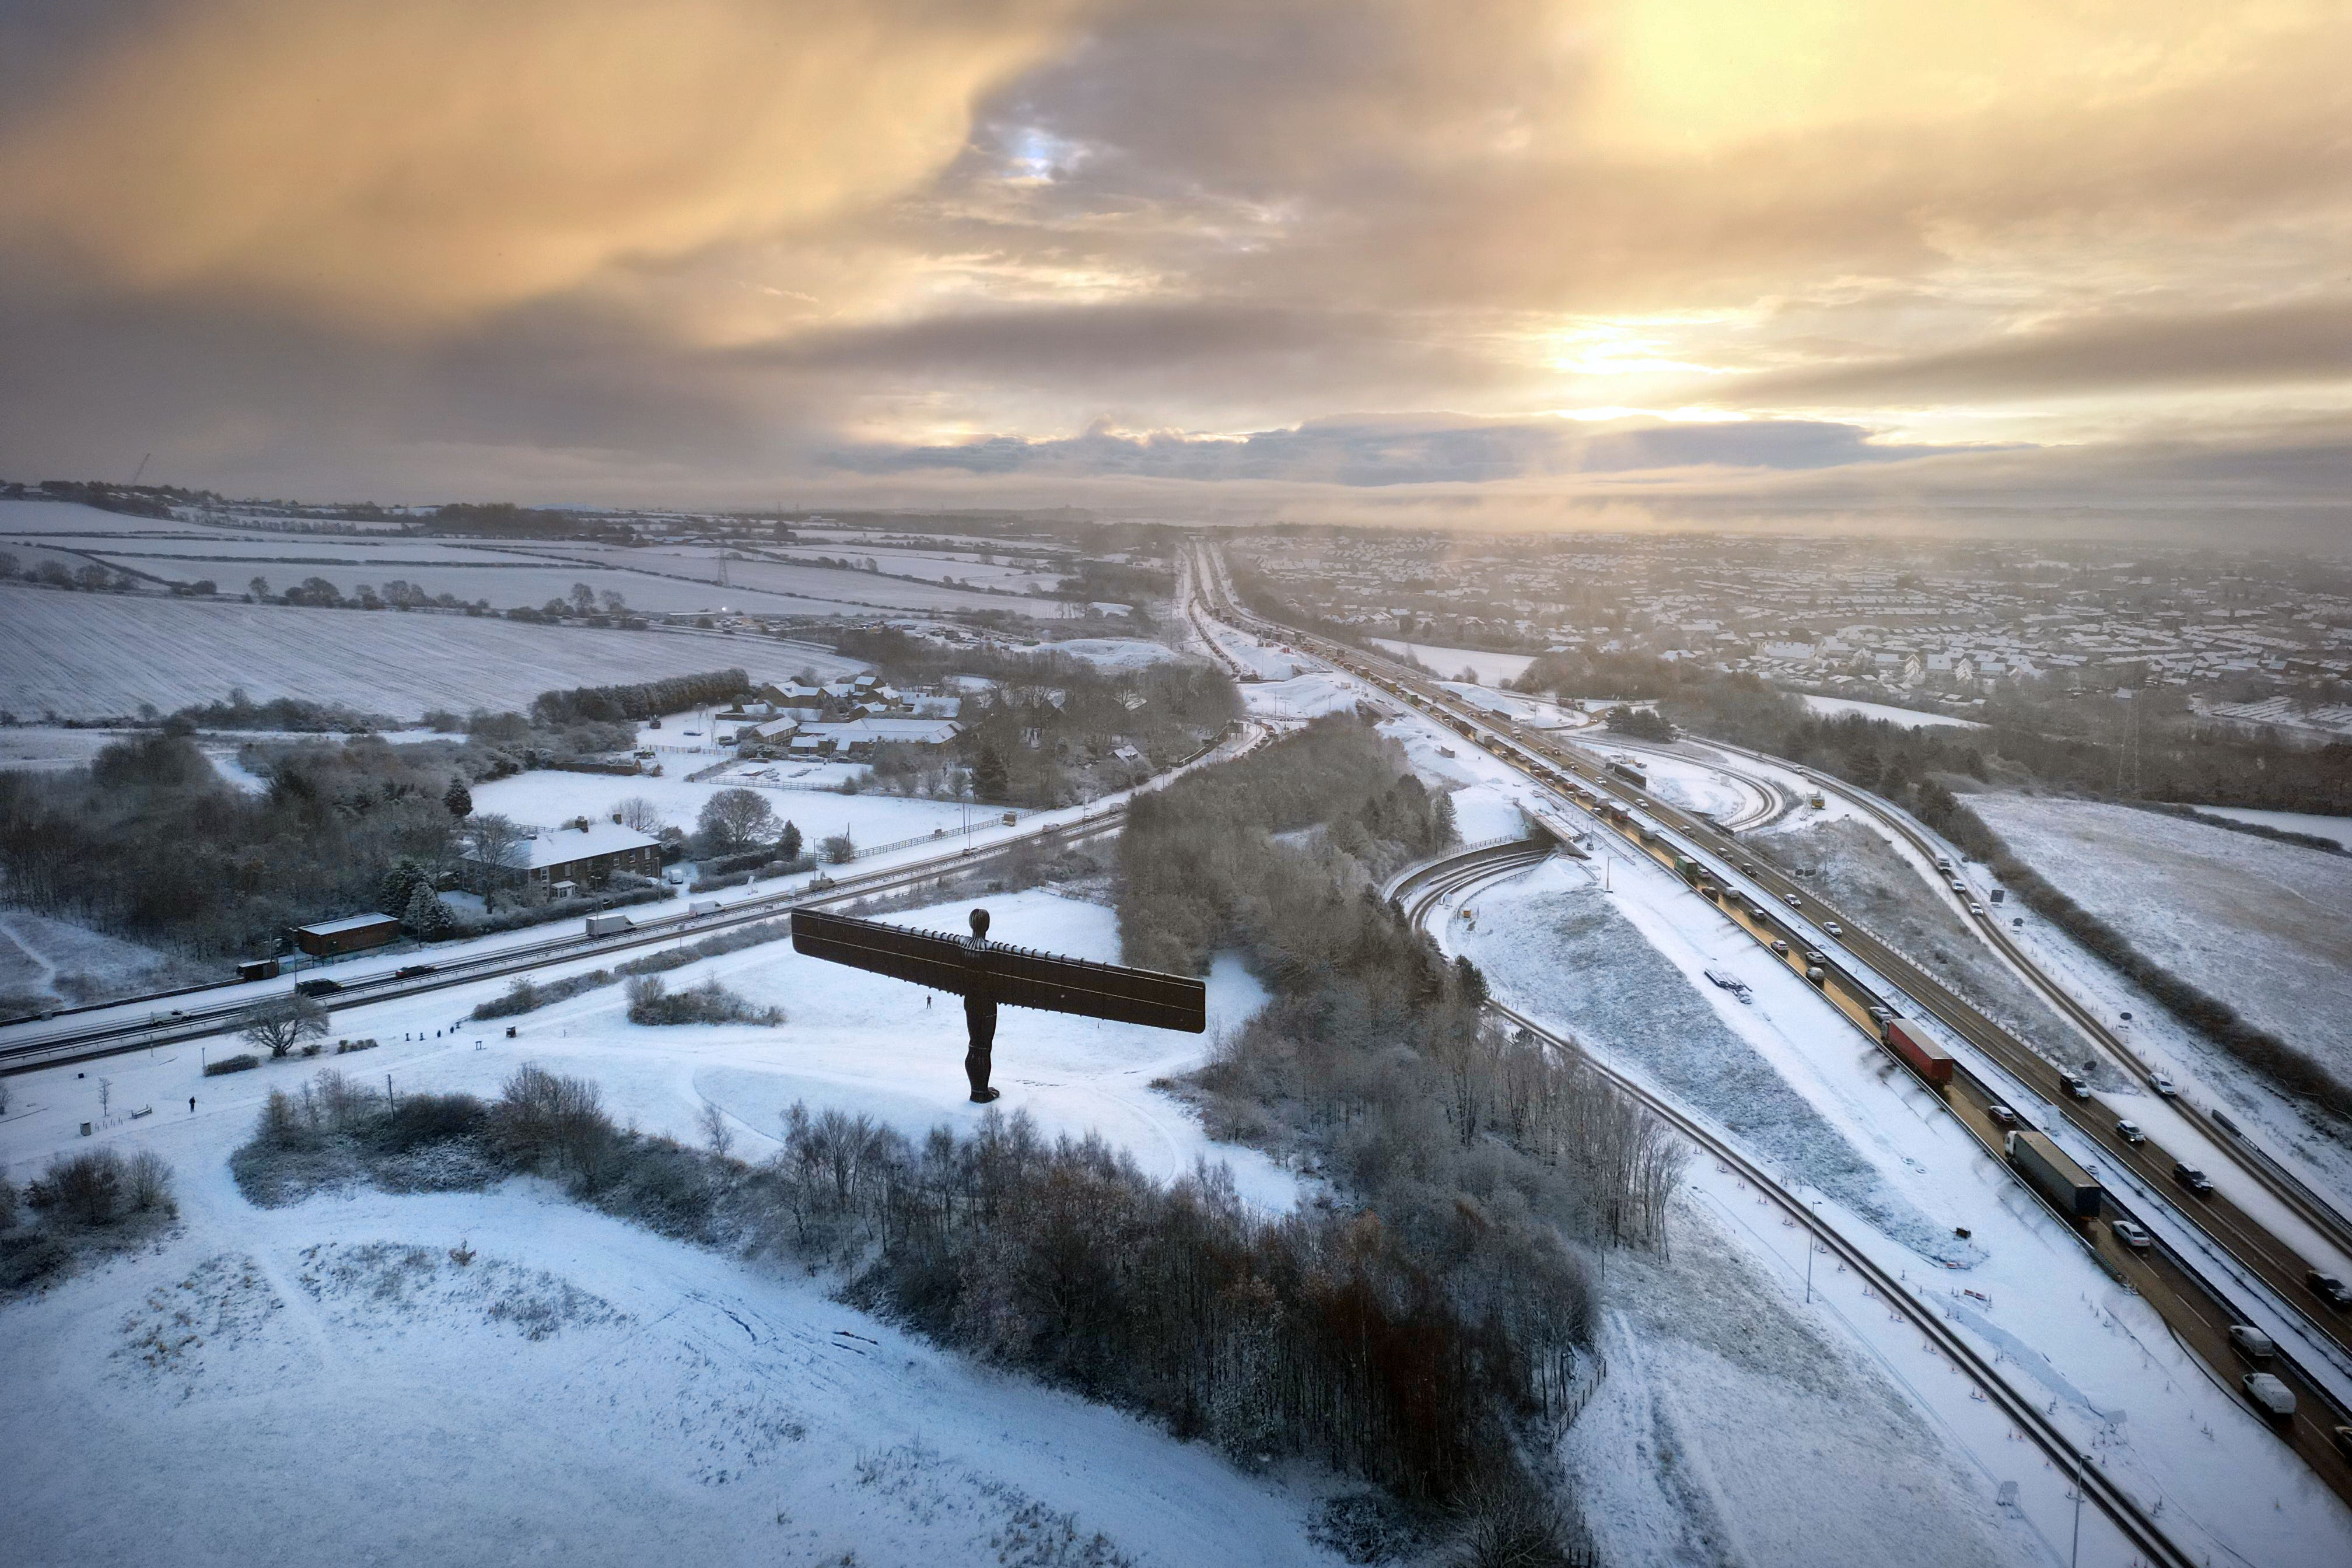 The cold weather has brought some beautiful scenery, like in this picture of the Angel of the North statue in Gateshead covered in snow